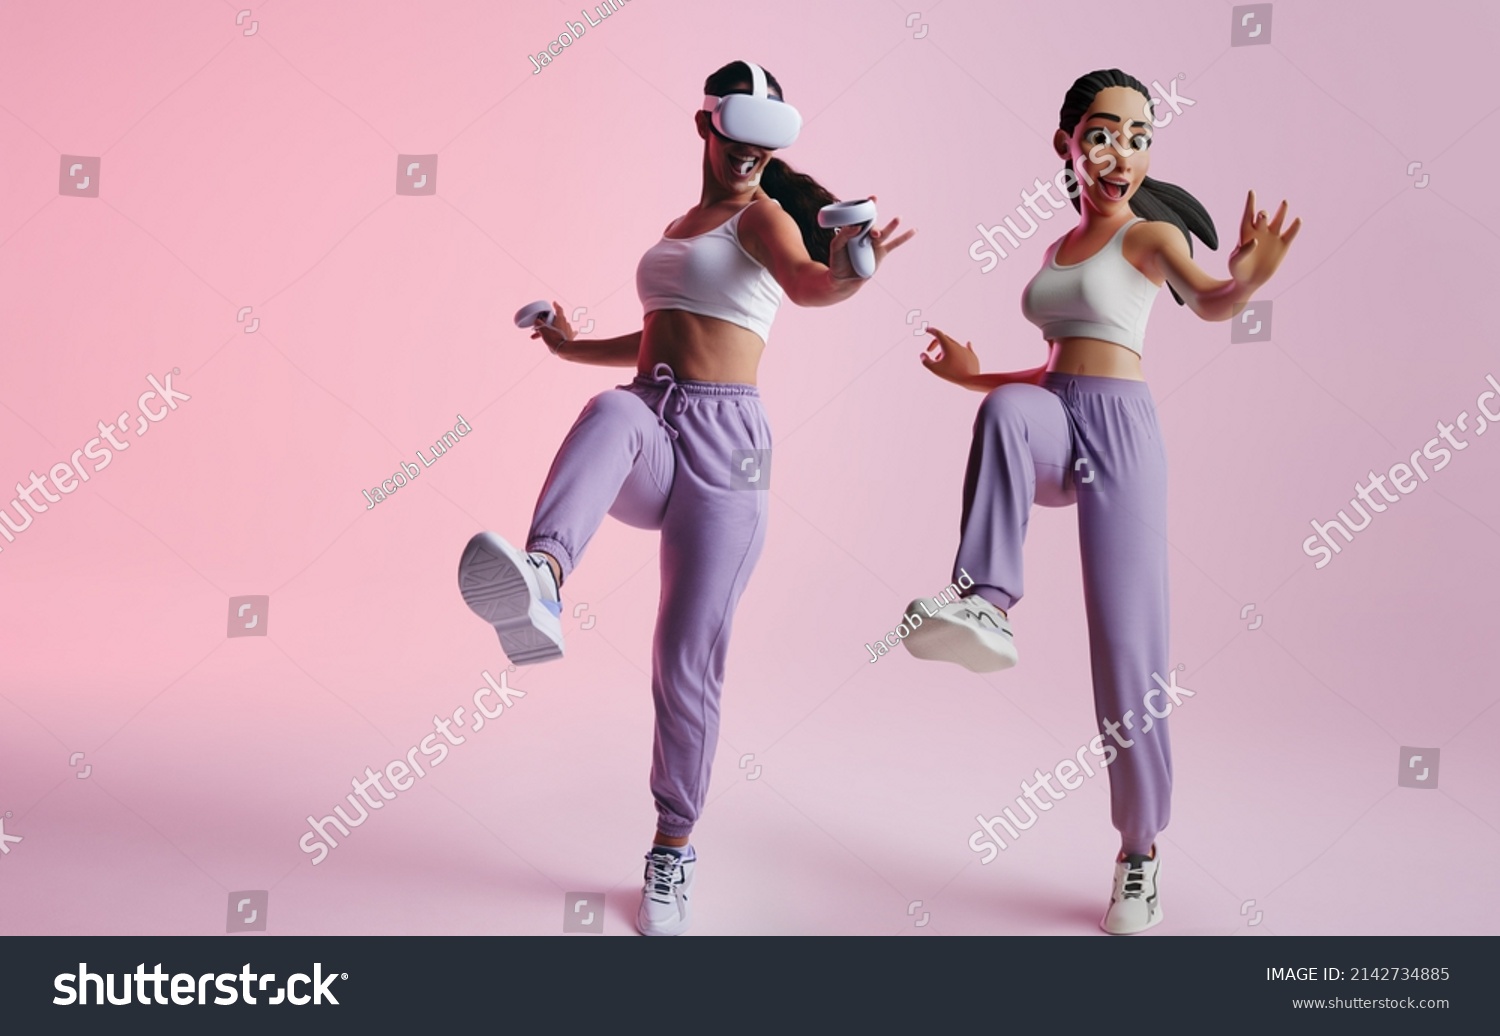 Cheerful young woman partying as a 3D avatar in the metaverse. Happy young woman dancing and having fun while wearing virtual reality goggles. Woman enjoying a 3D simulation in a studio. #2142734885